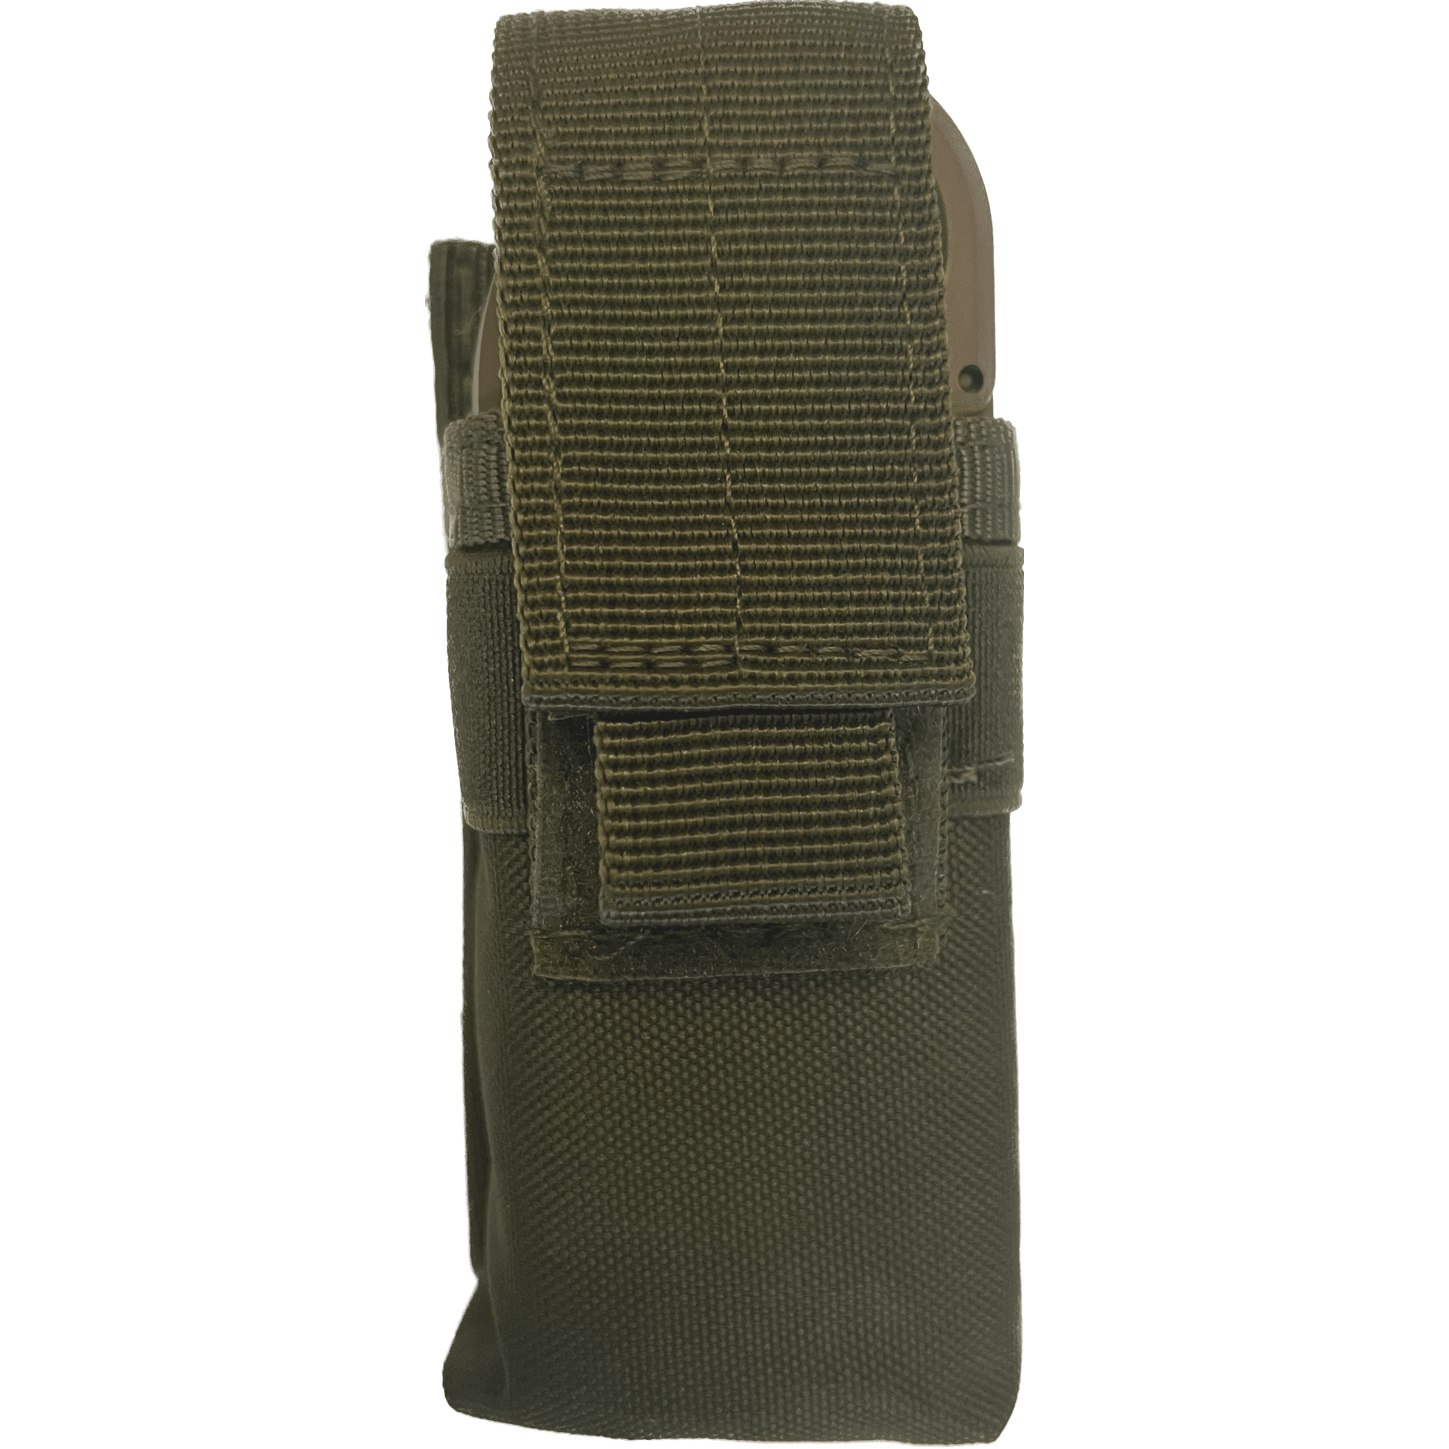 Extreme Meters Case for MOLLE/PALS fits Kestrel 5 Series Meters - ExtremeMeters.com